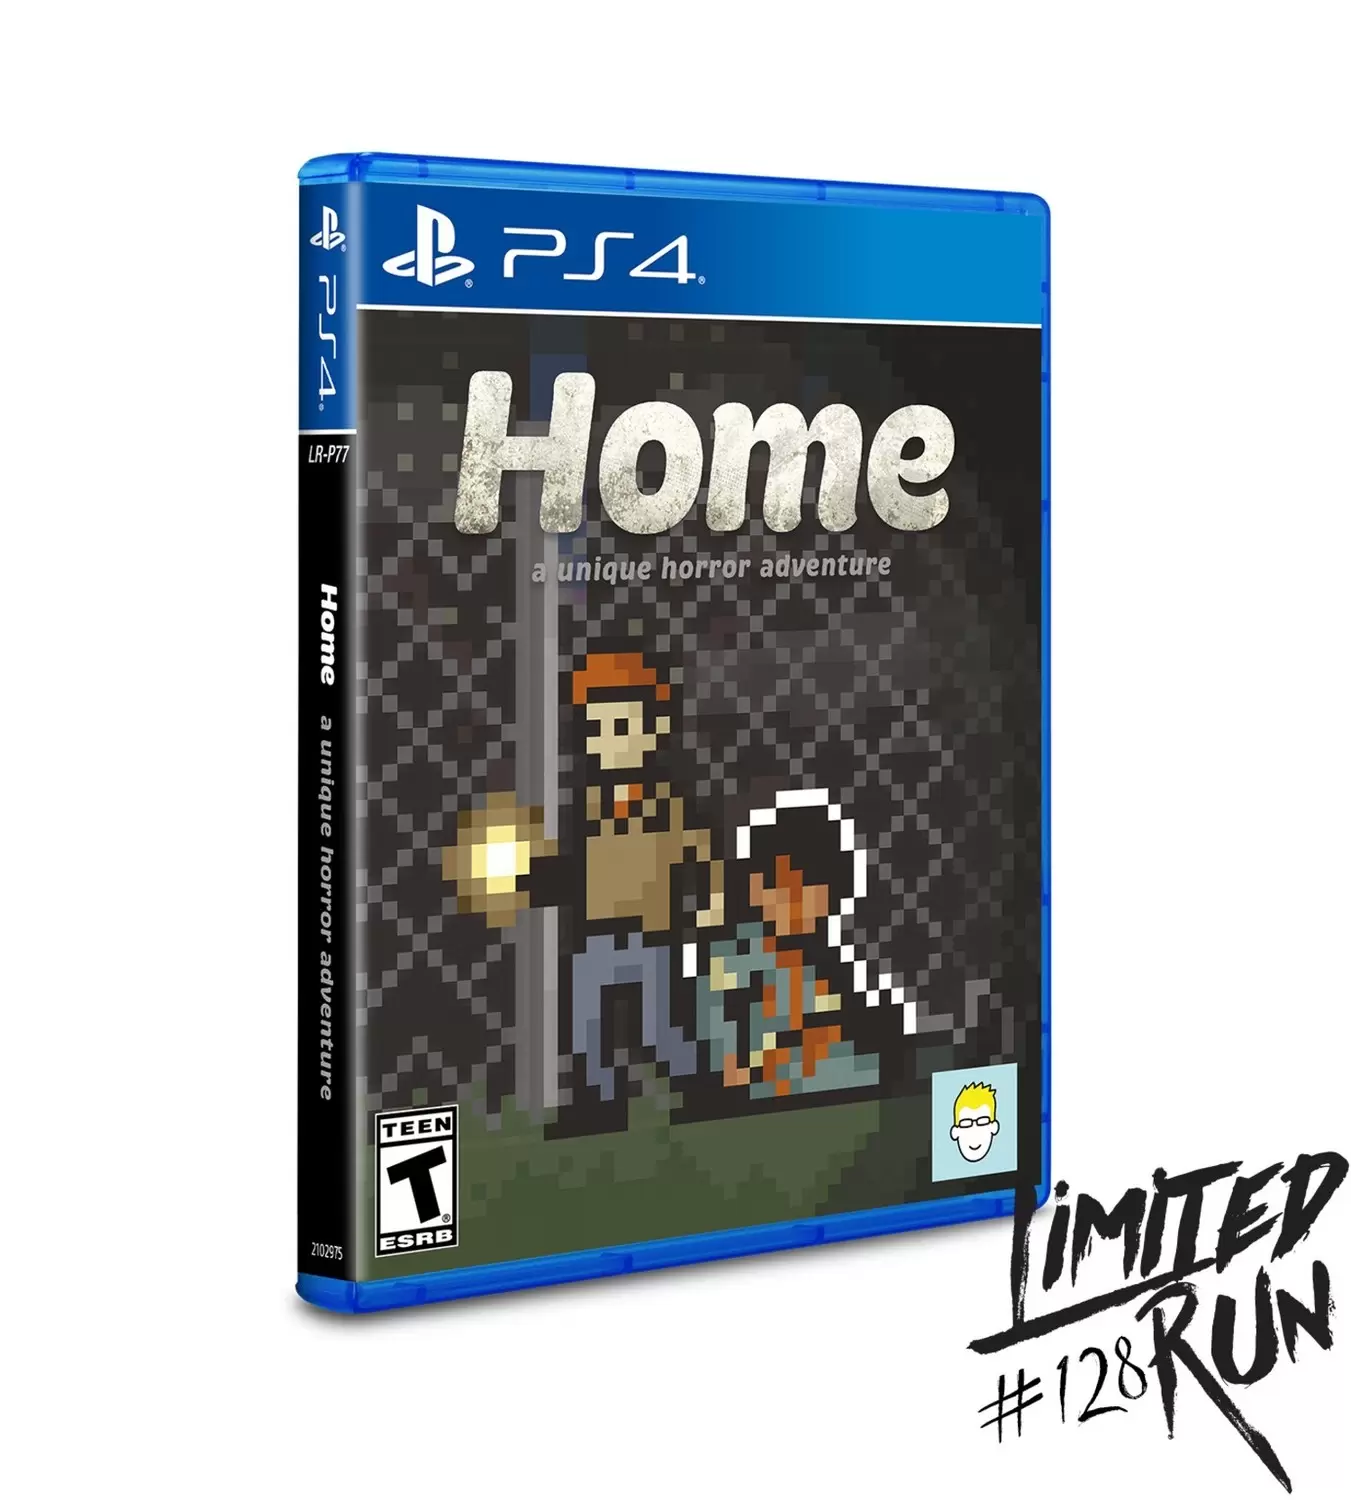 PS4 Games - Home